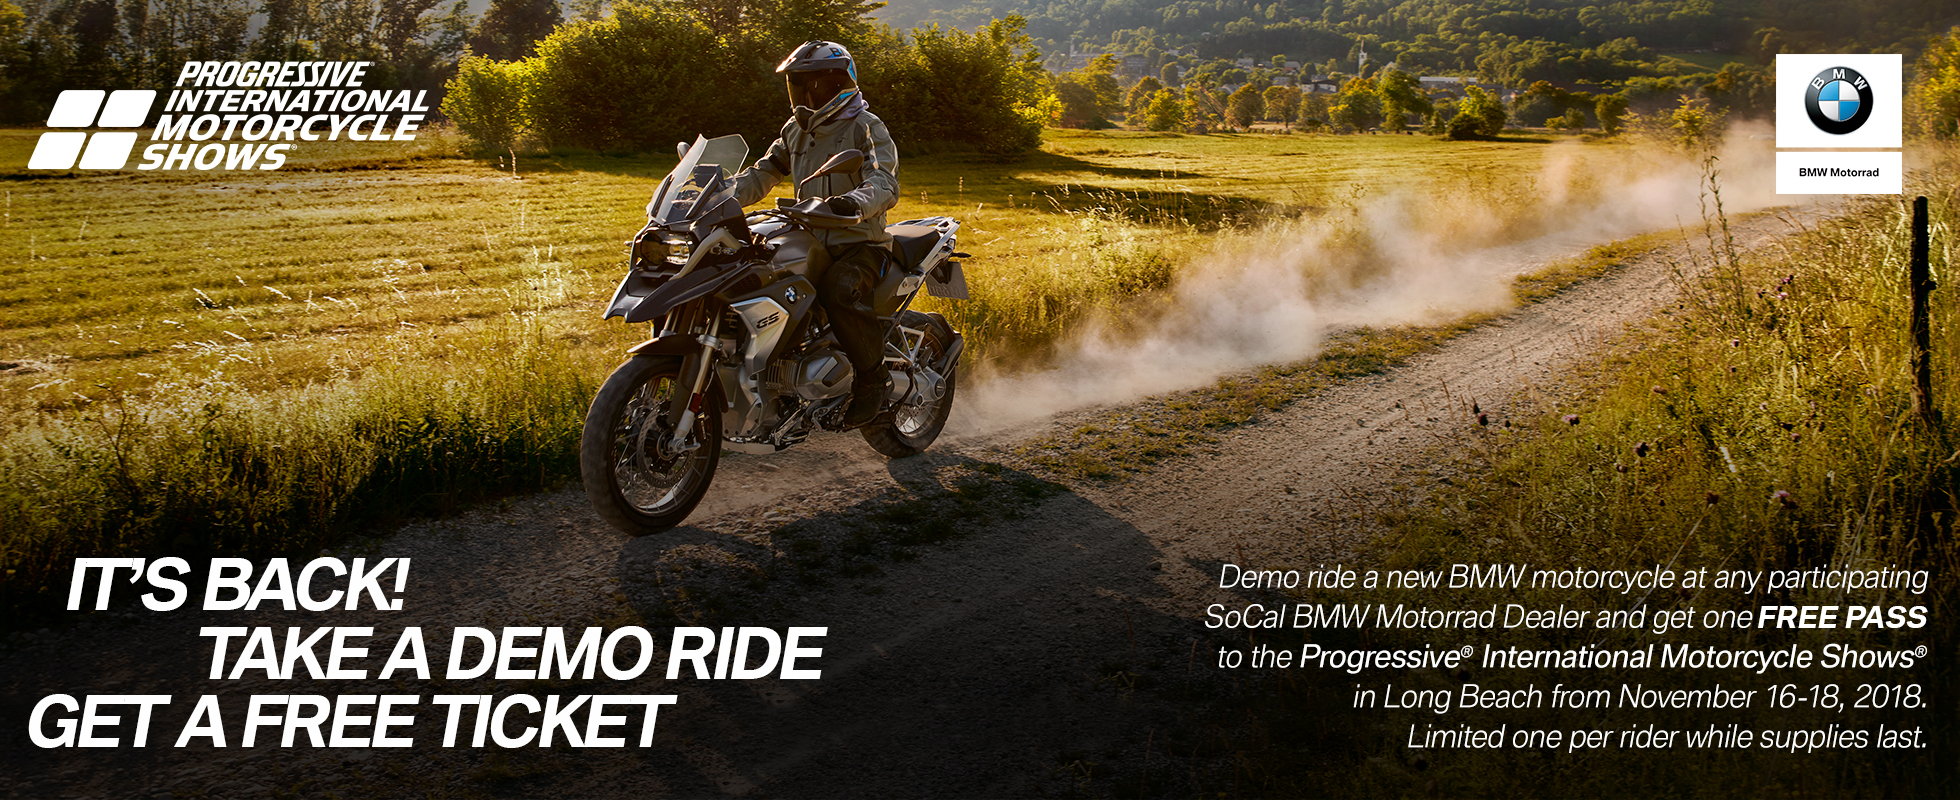 Southern California BMW Motorcycle Dealers | Take A Demo Ride, Get A